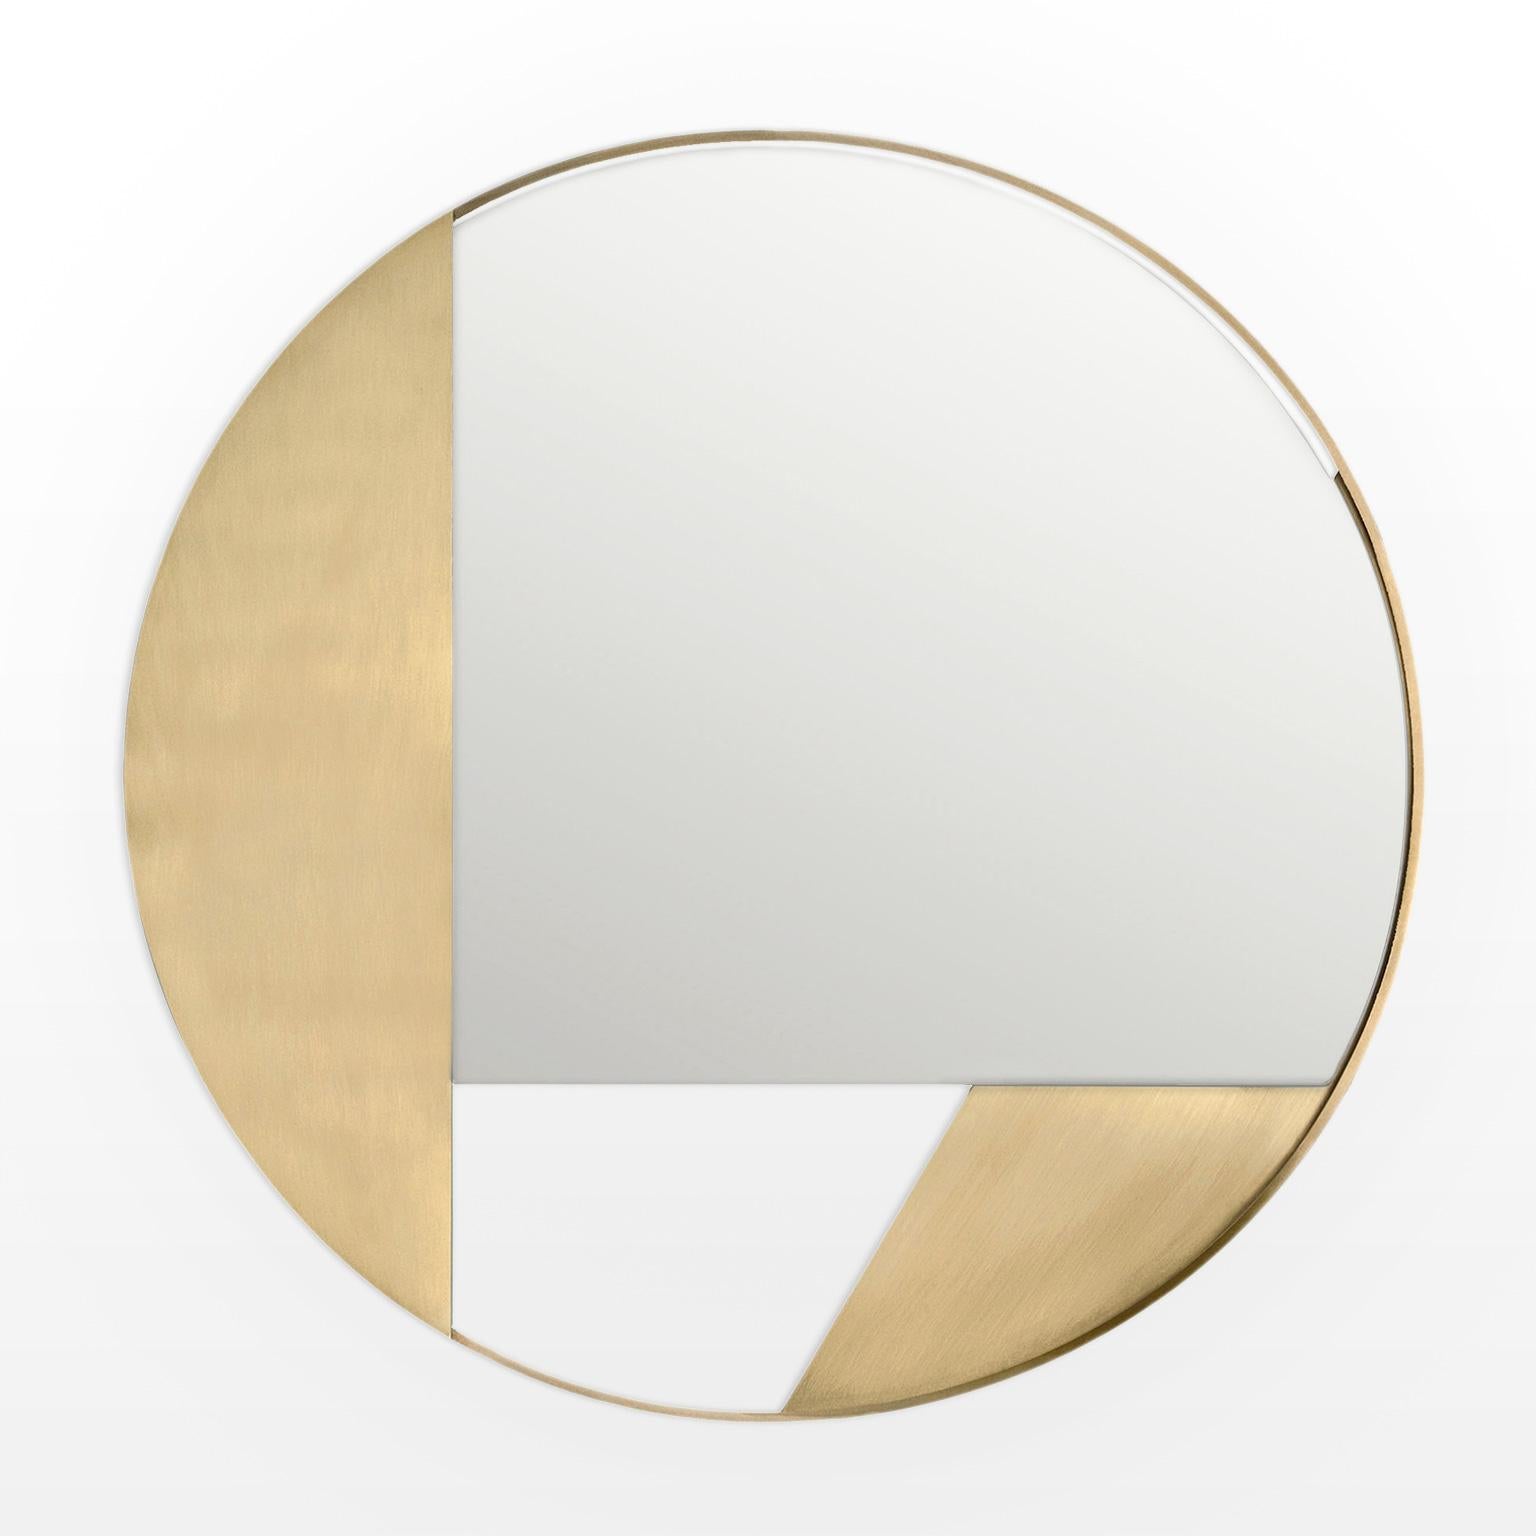 Revolution V3 is a 21st Century mirror of 90 cm diameter, made by Italian artisans in different shades and colors. The piece will be produced in a limited edition of 1000 signed and progressively numbered examples. It is part of the collectible